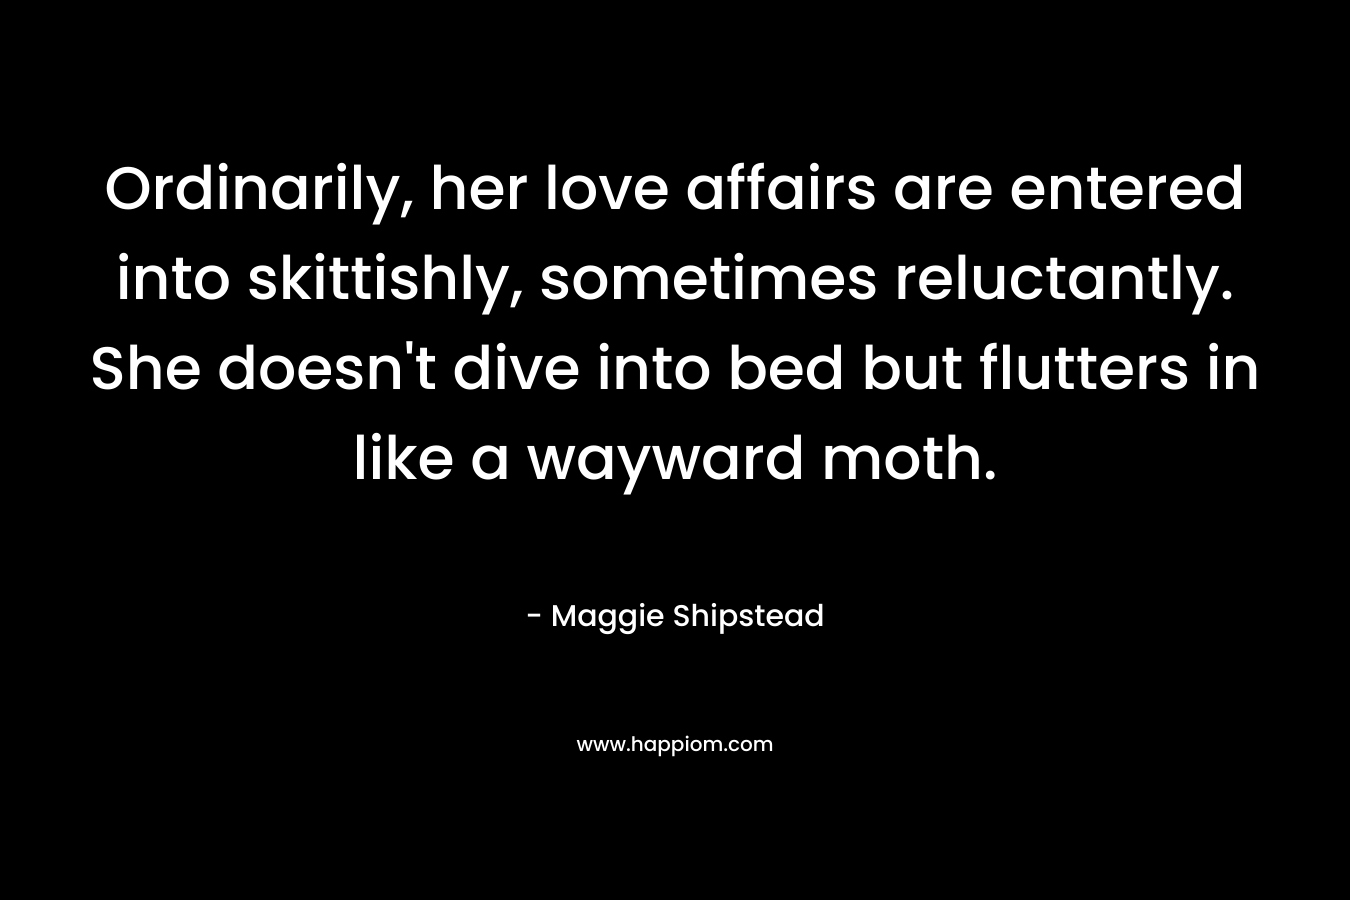 Ordinarily, her love affairs are entered into skittishly, sometimes reluctantly. She doesn’t dive into bed but flutters in like a wayward moth. – Maggie Shipstead